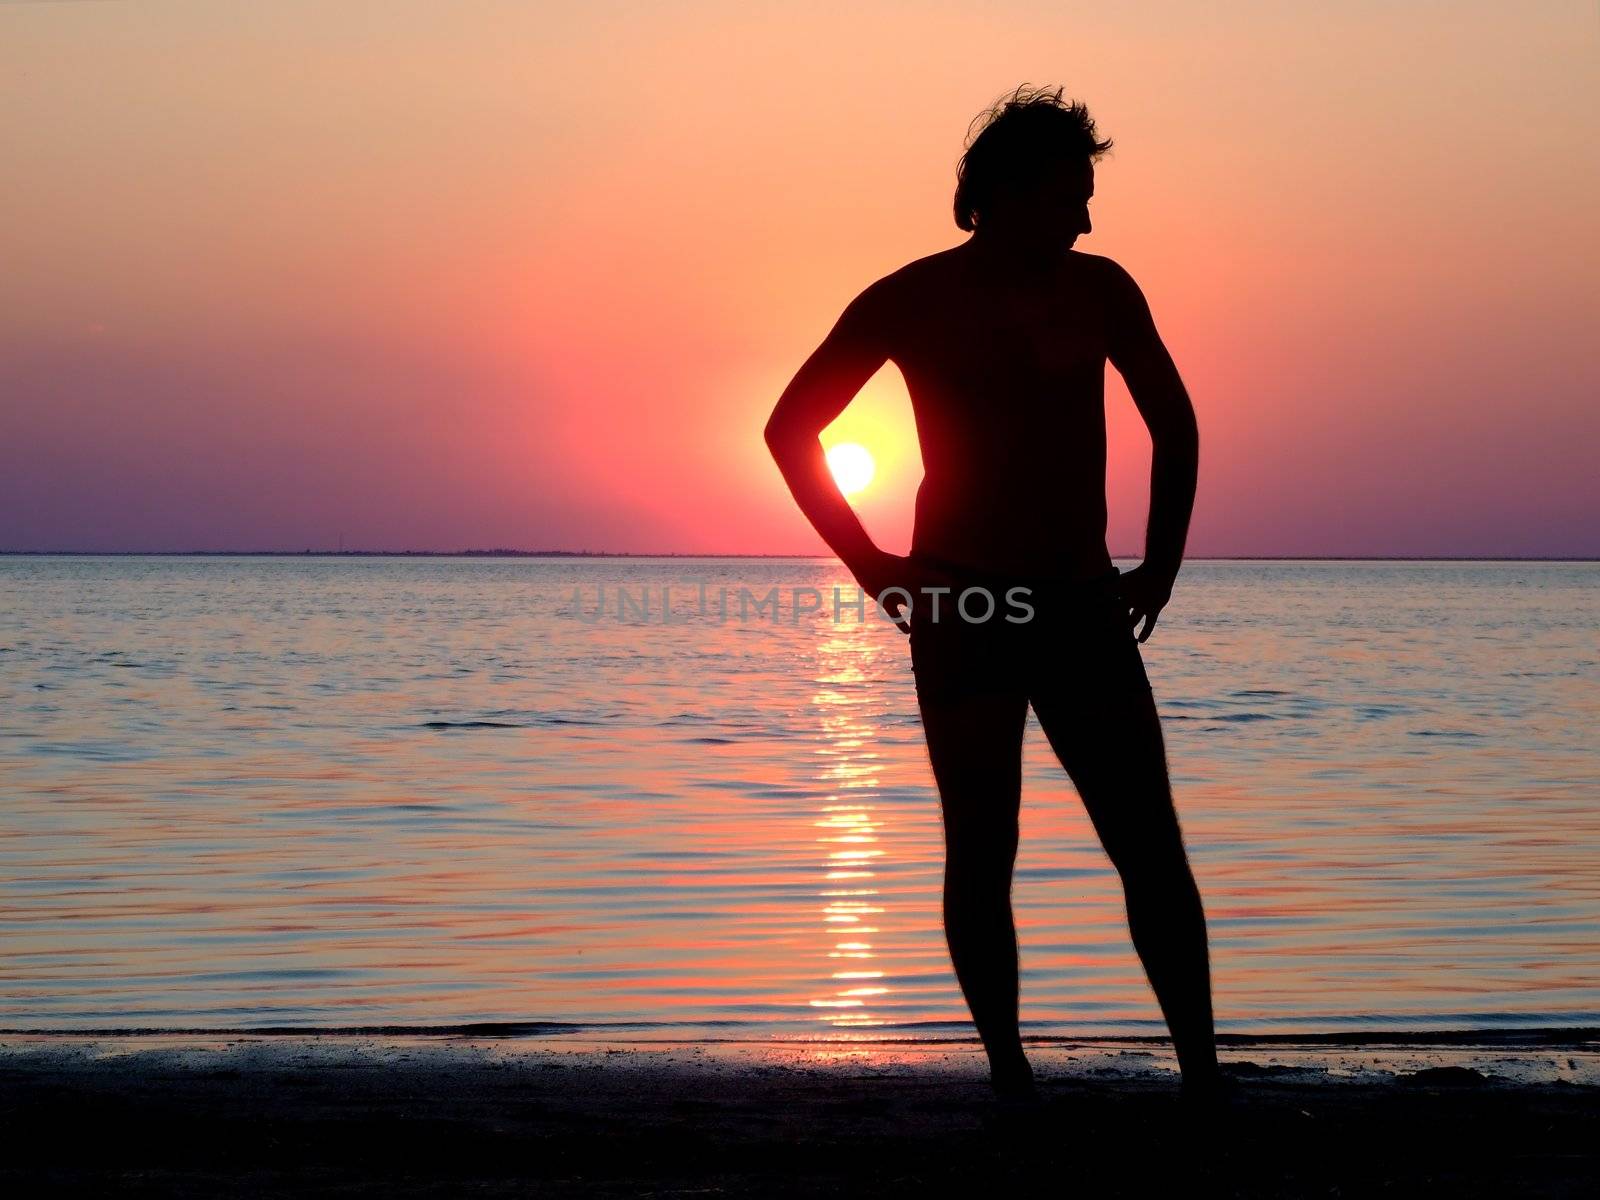 A black silhouette of a young guy on a sunset 2